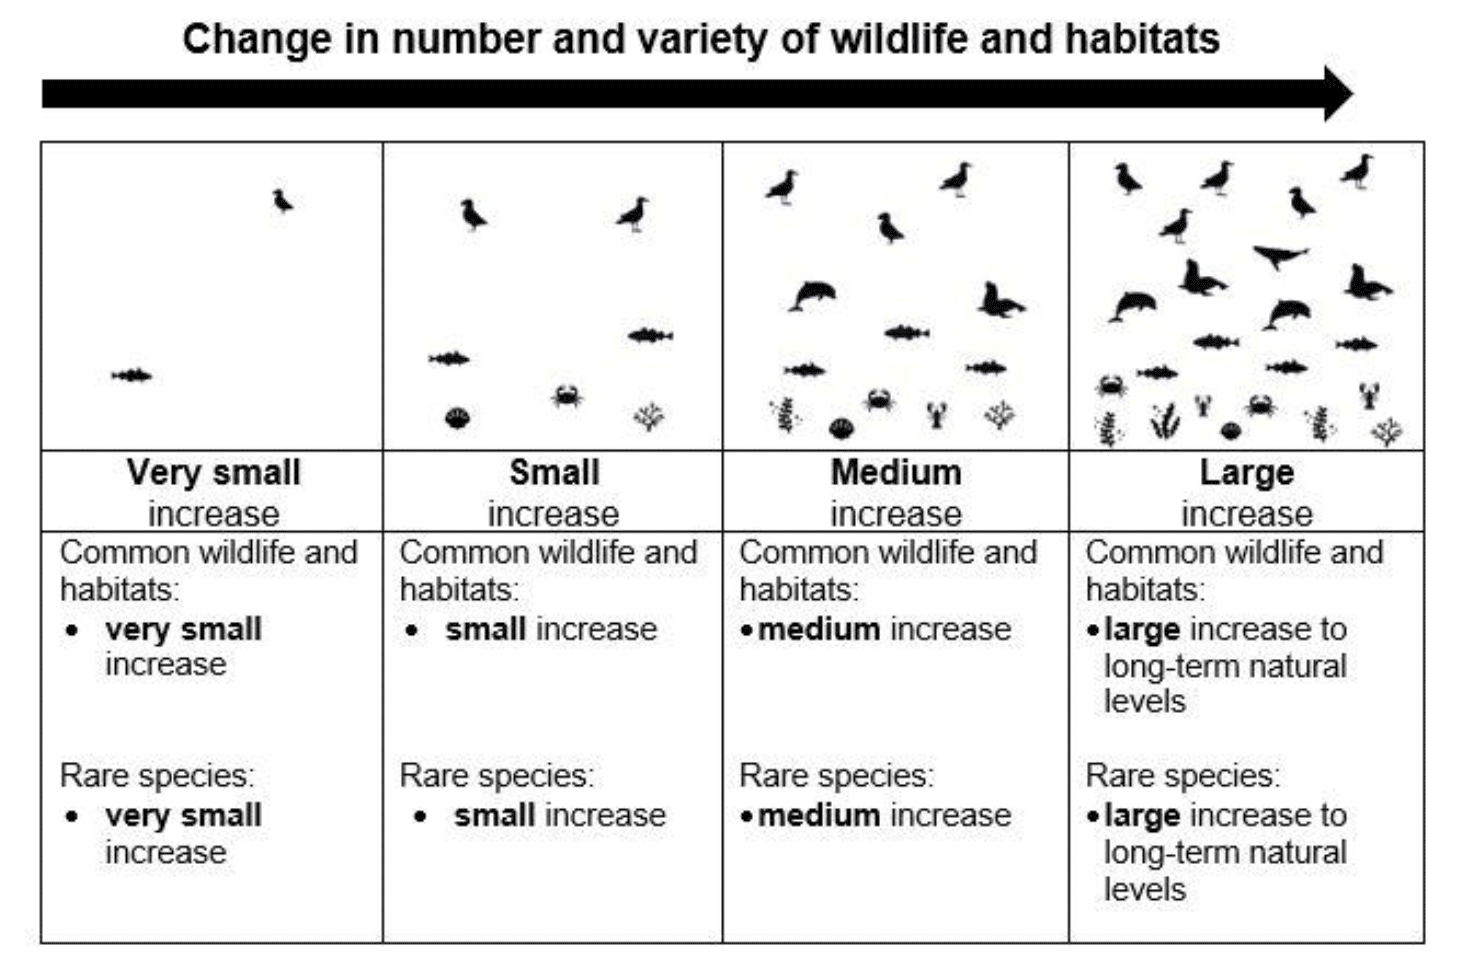 Image showing the levels of increase for wildlife and habitats attribute. Four levels shown: very small, small, medium and large increase.